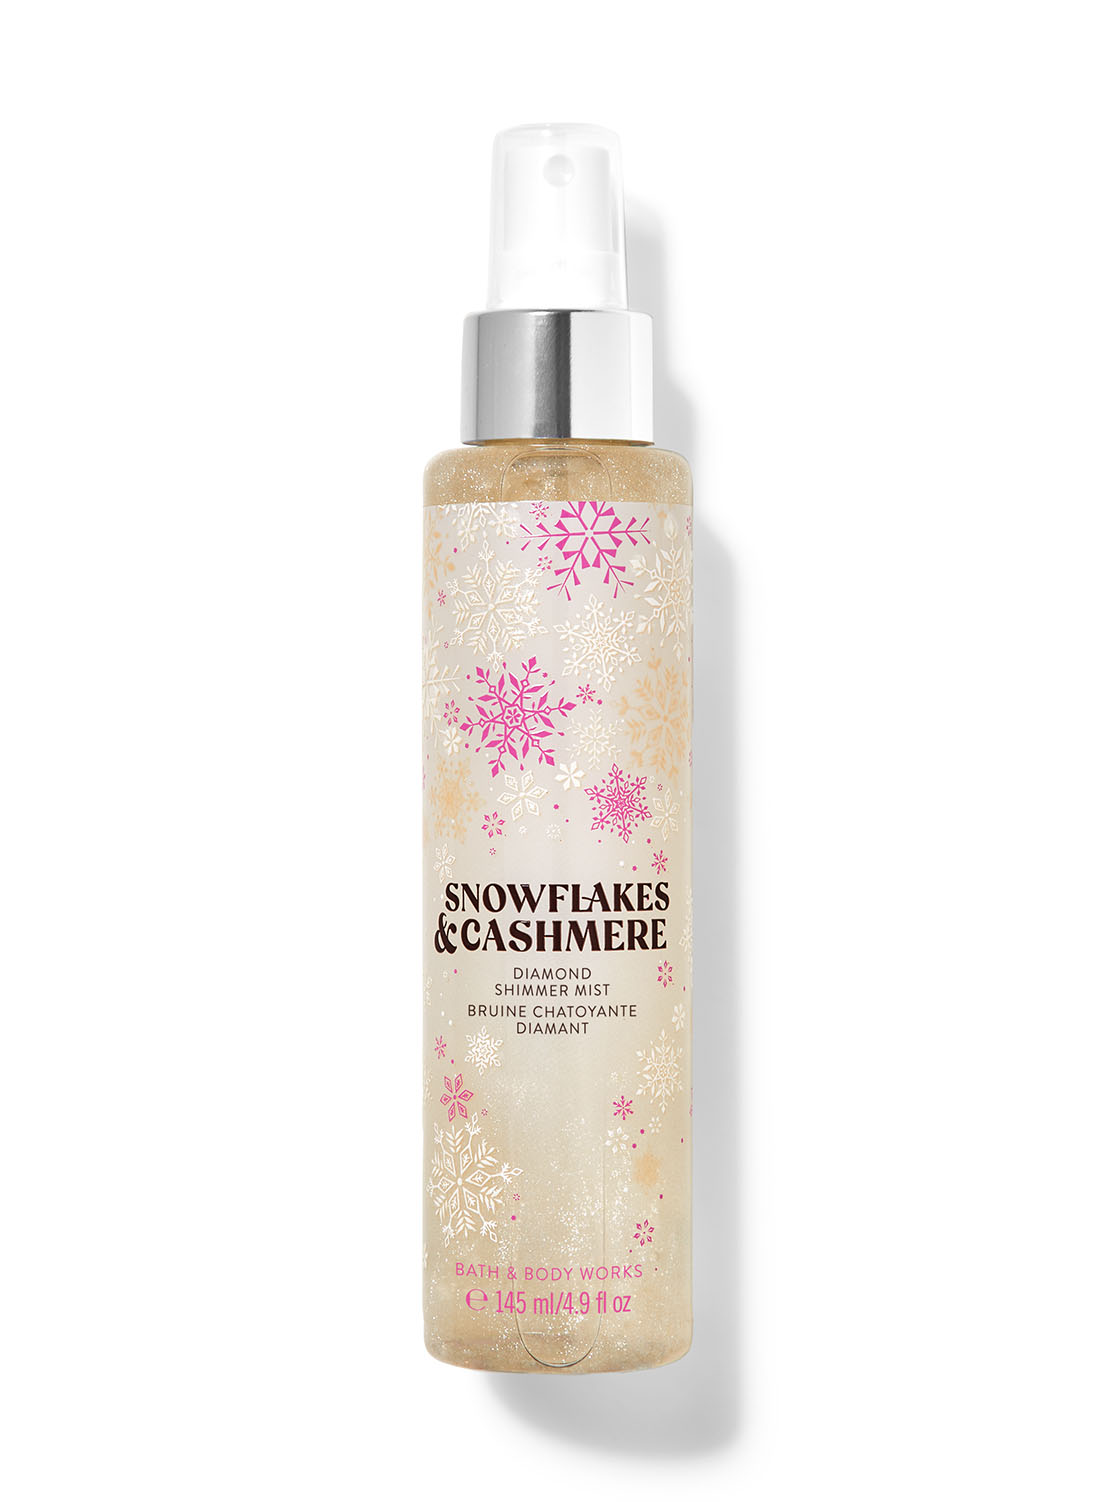 Snowflakes & Cashmere Diamond Shimmer Mist | Bath and Body Works